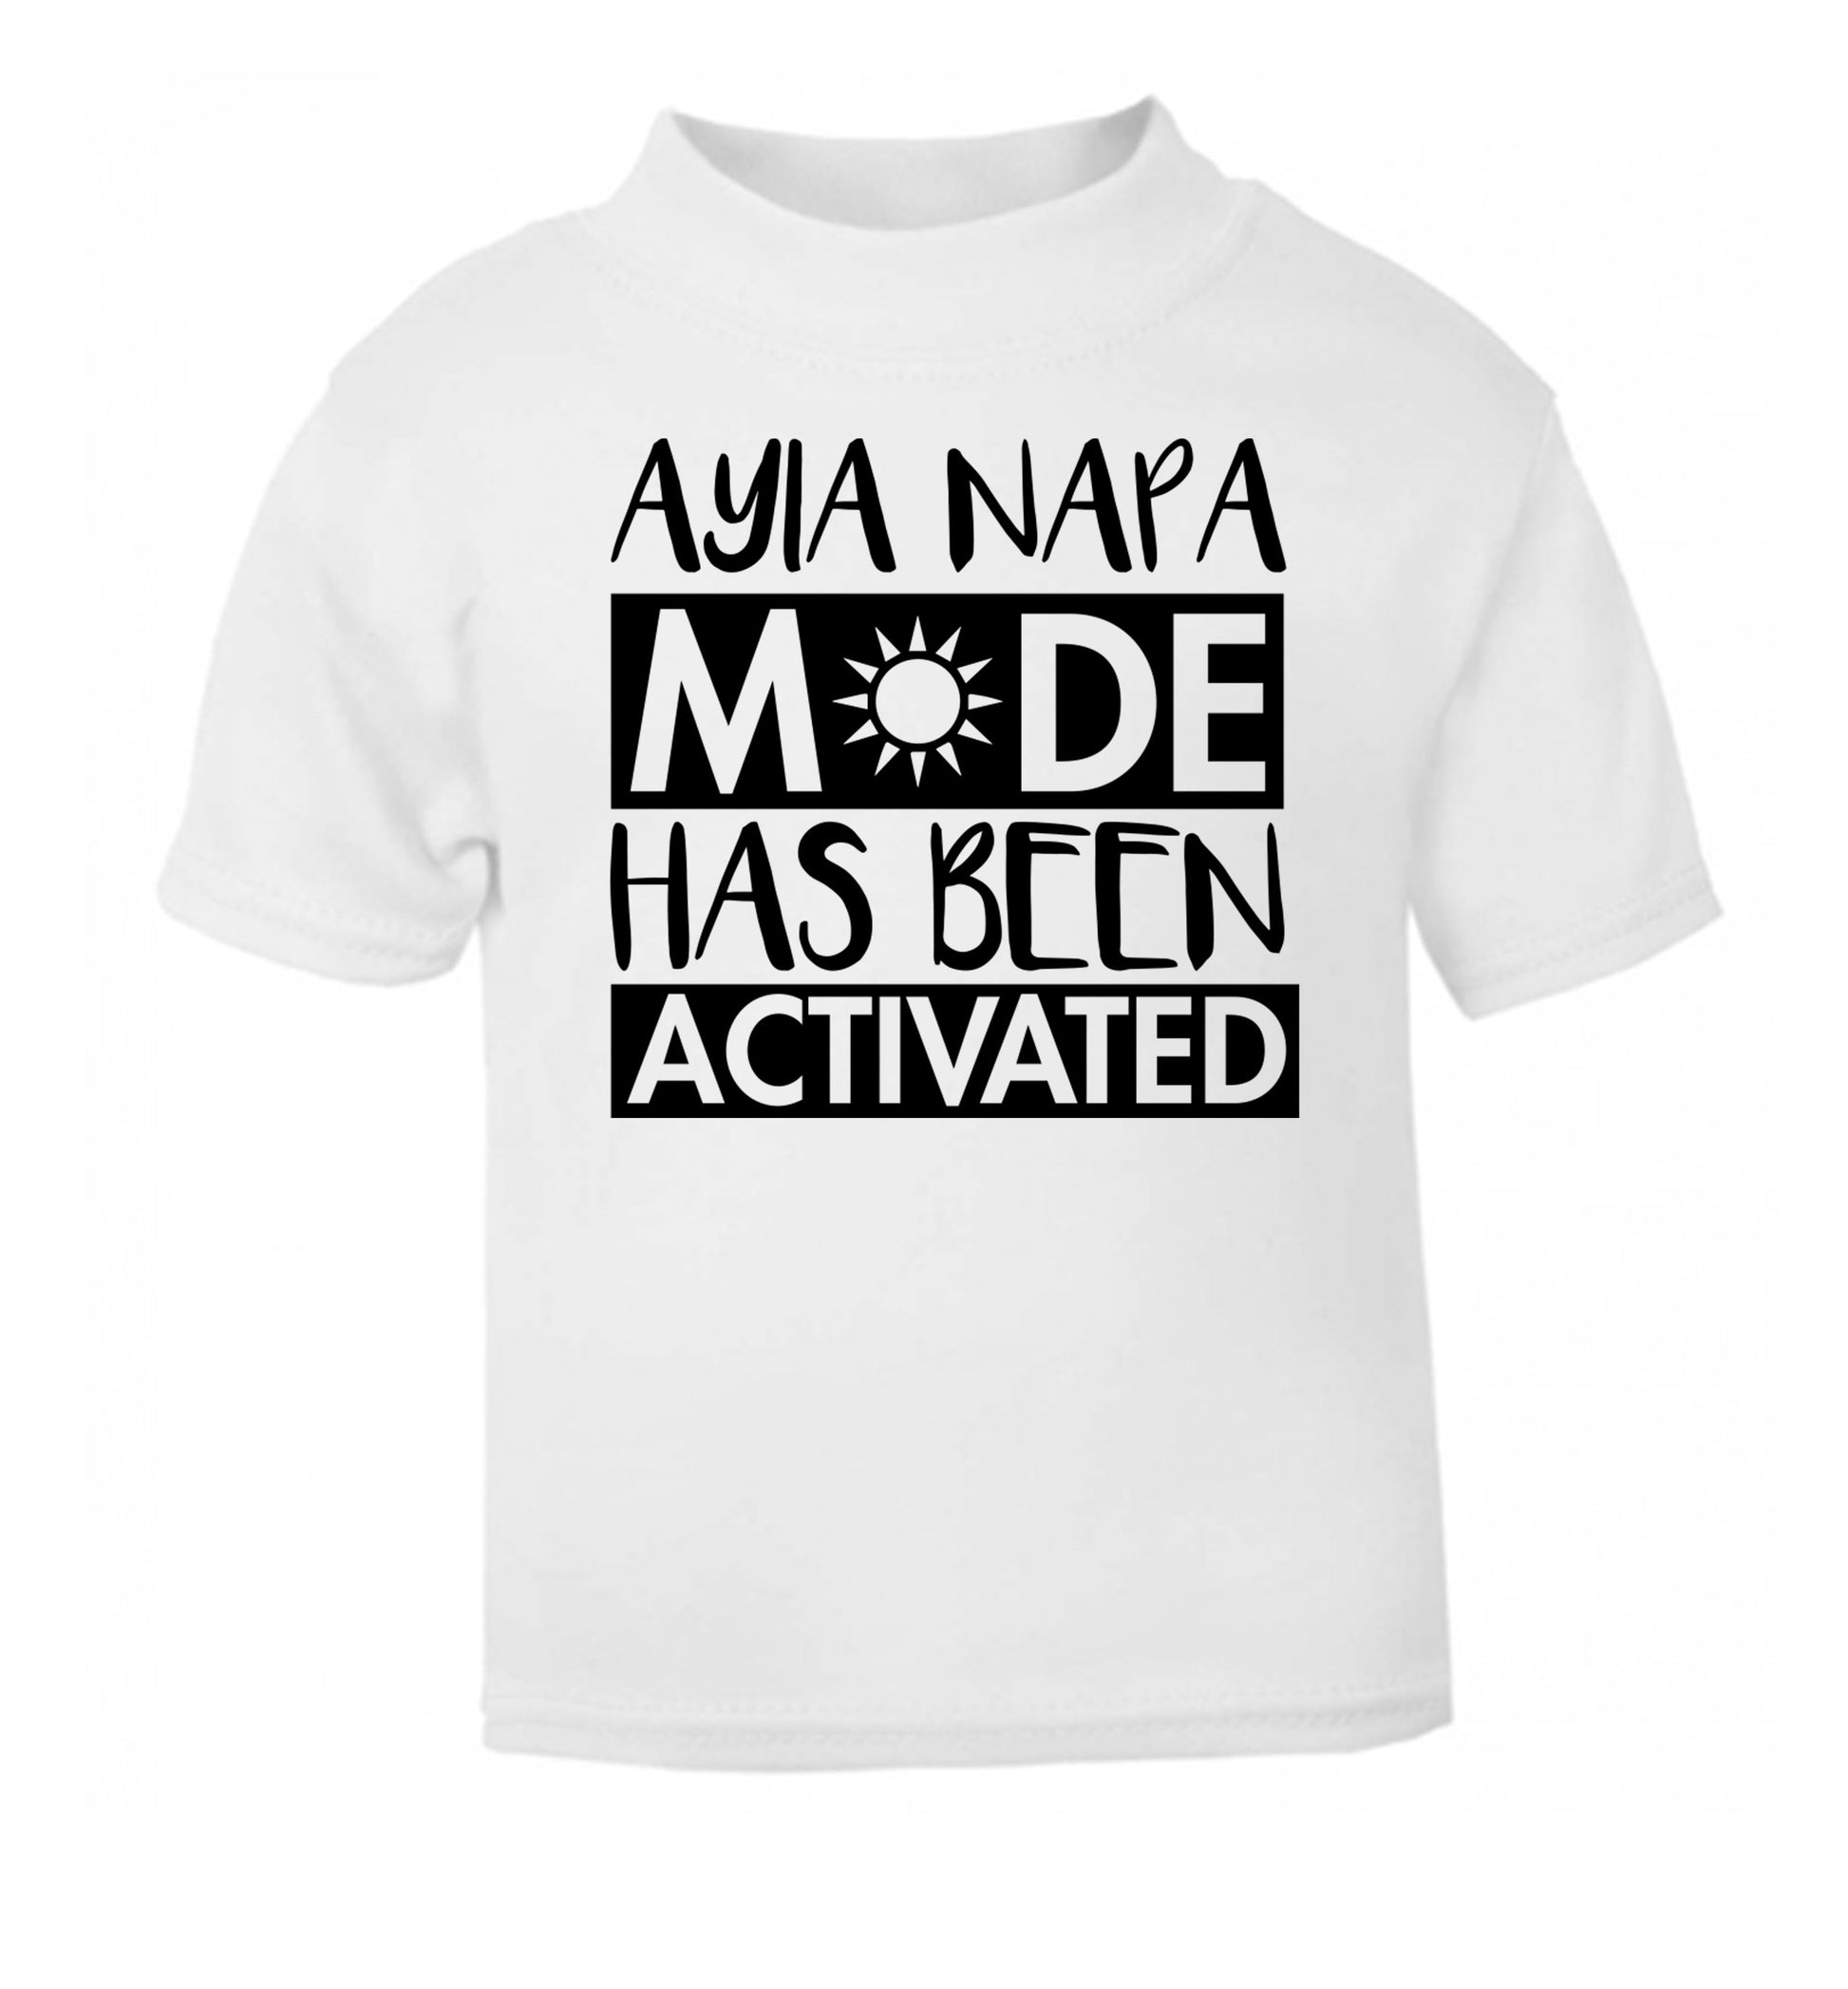 Aiya Napa mode has been activated white Baby Toddler Tshirt 2 Years